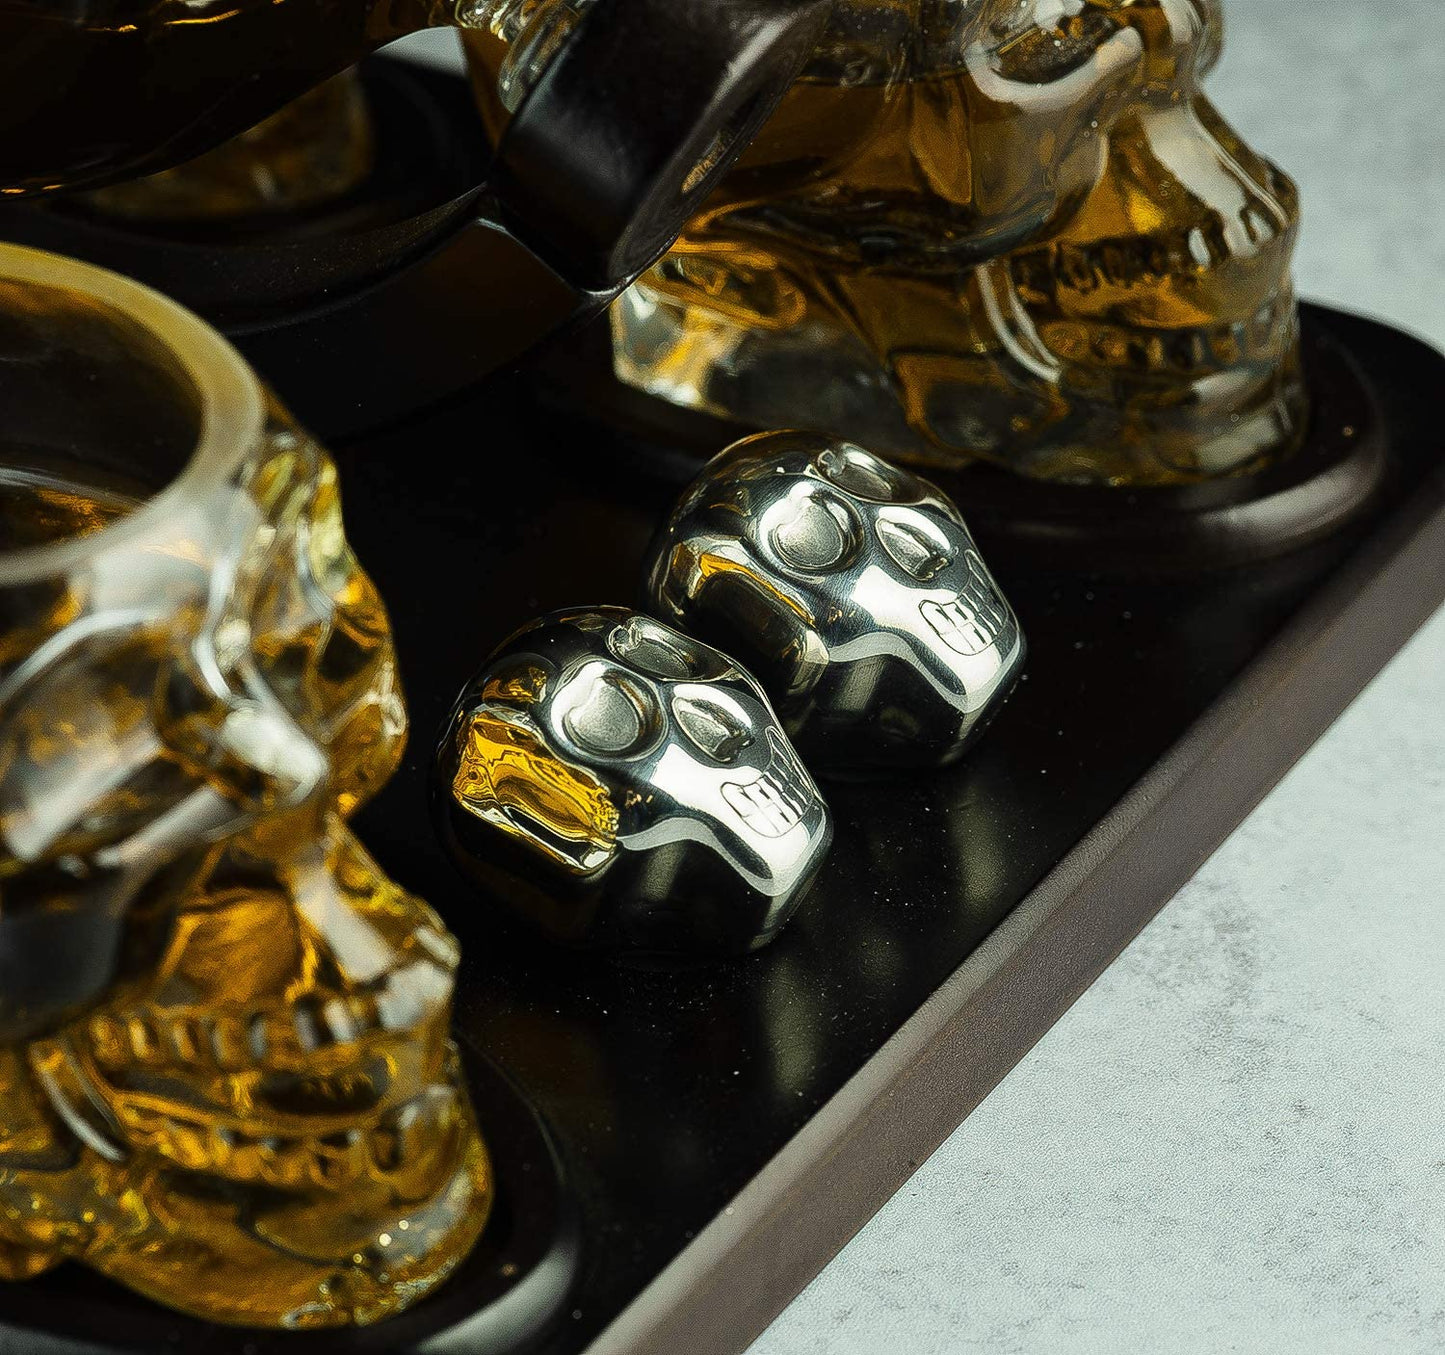 Large Skull Decanter Set - By The Wine Savant